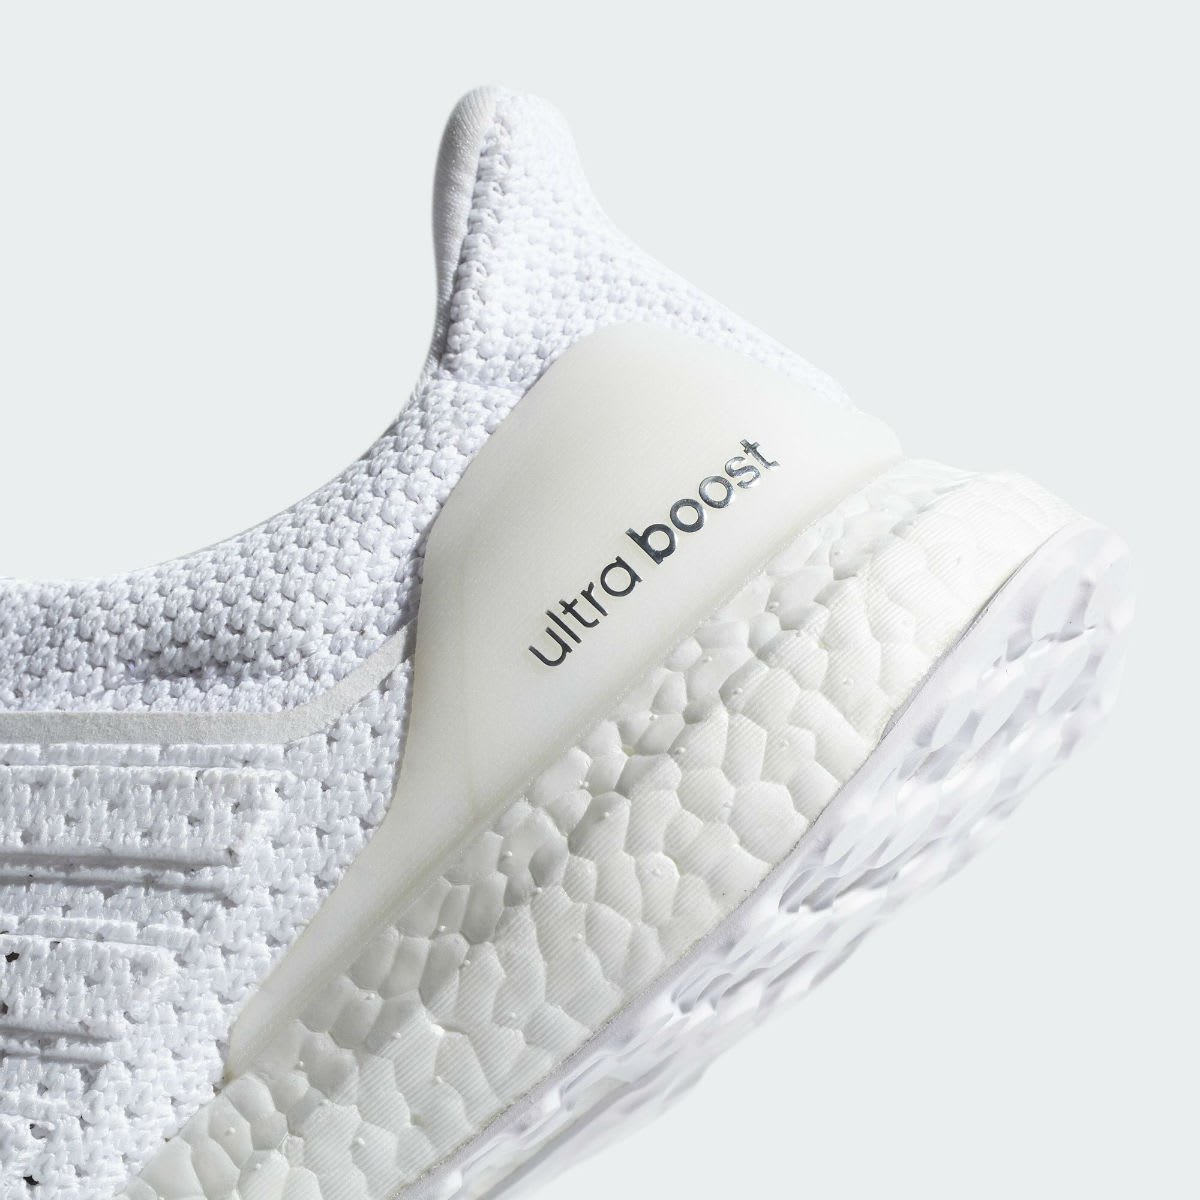 Adidas Ultra Boost Climacool White BY8888 Release Date Midsole